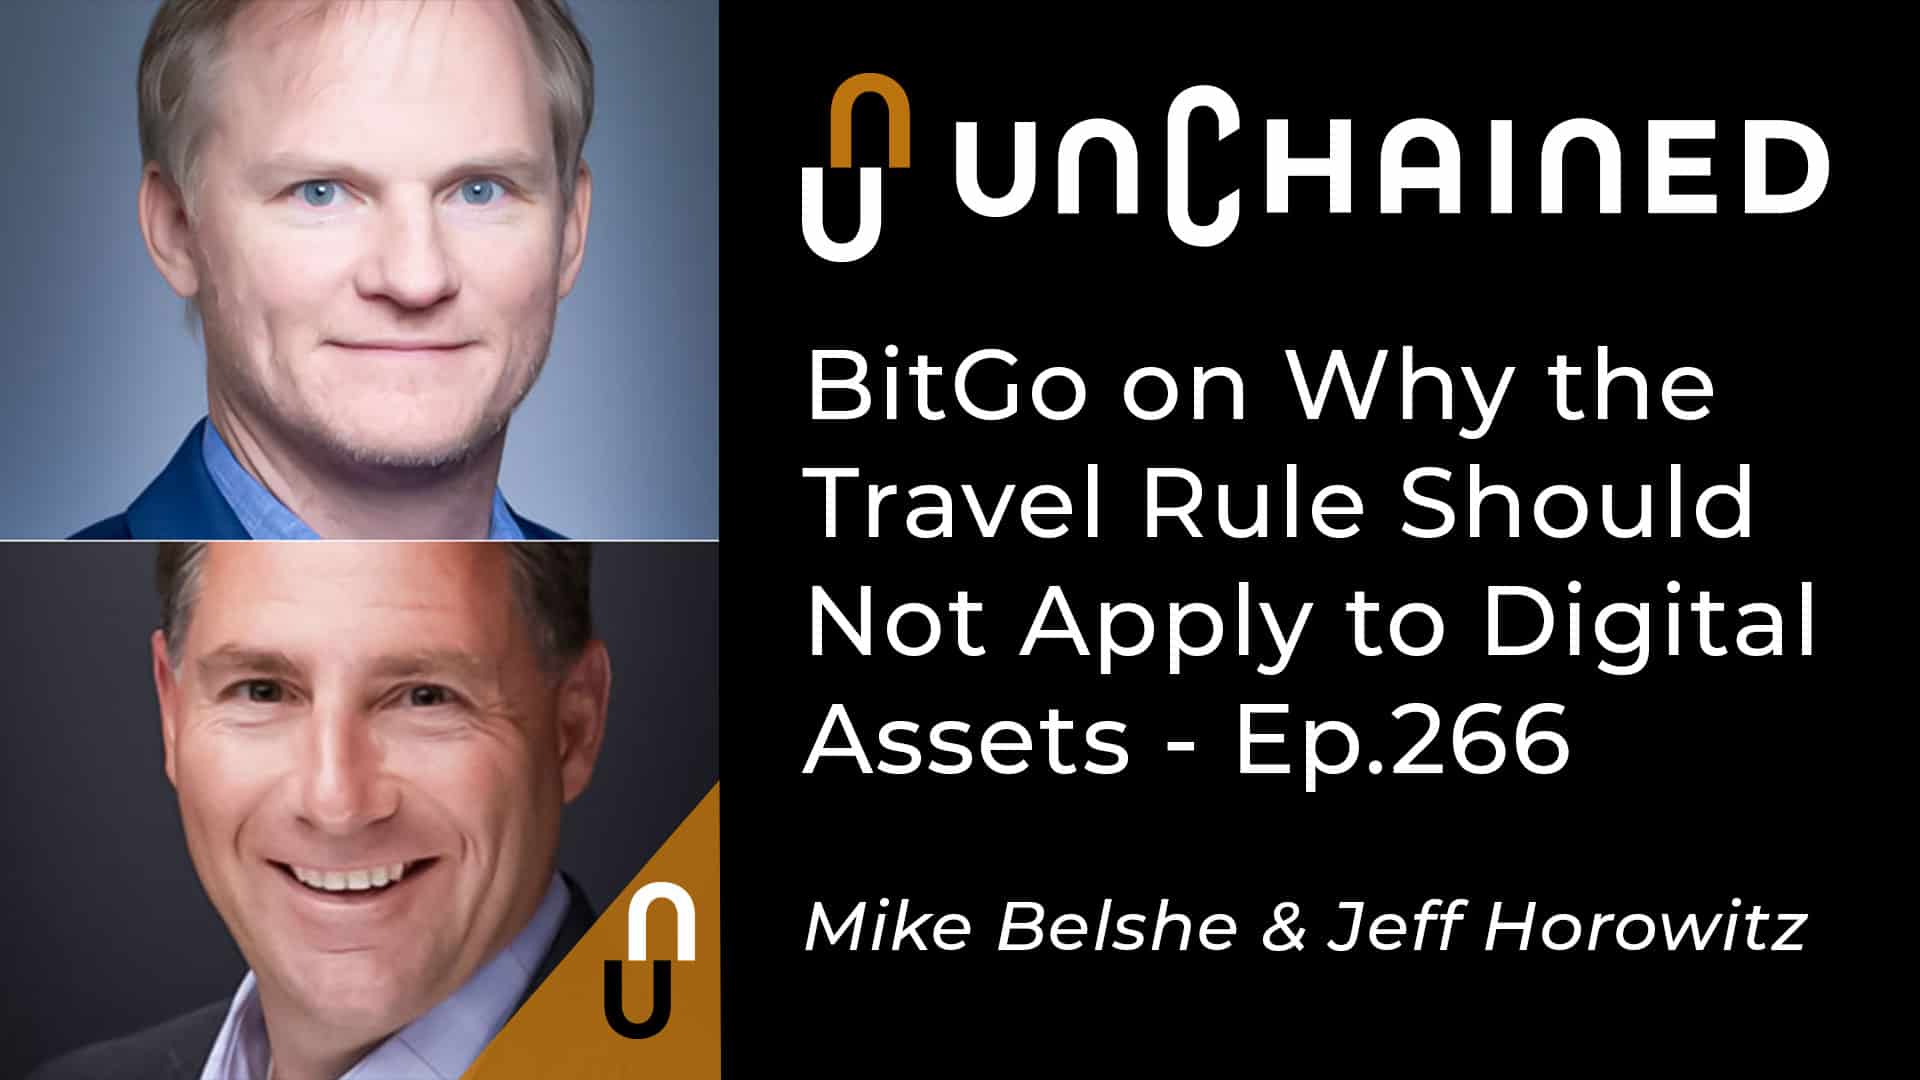 Unchained - Ep.266 - BitGo on Why the Travel Rule Should Not Apply to Digital Assets